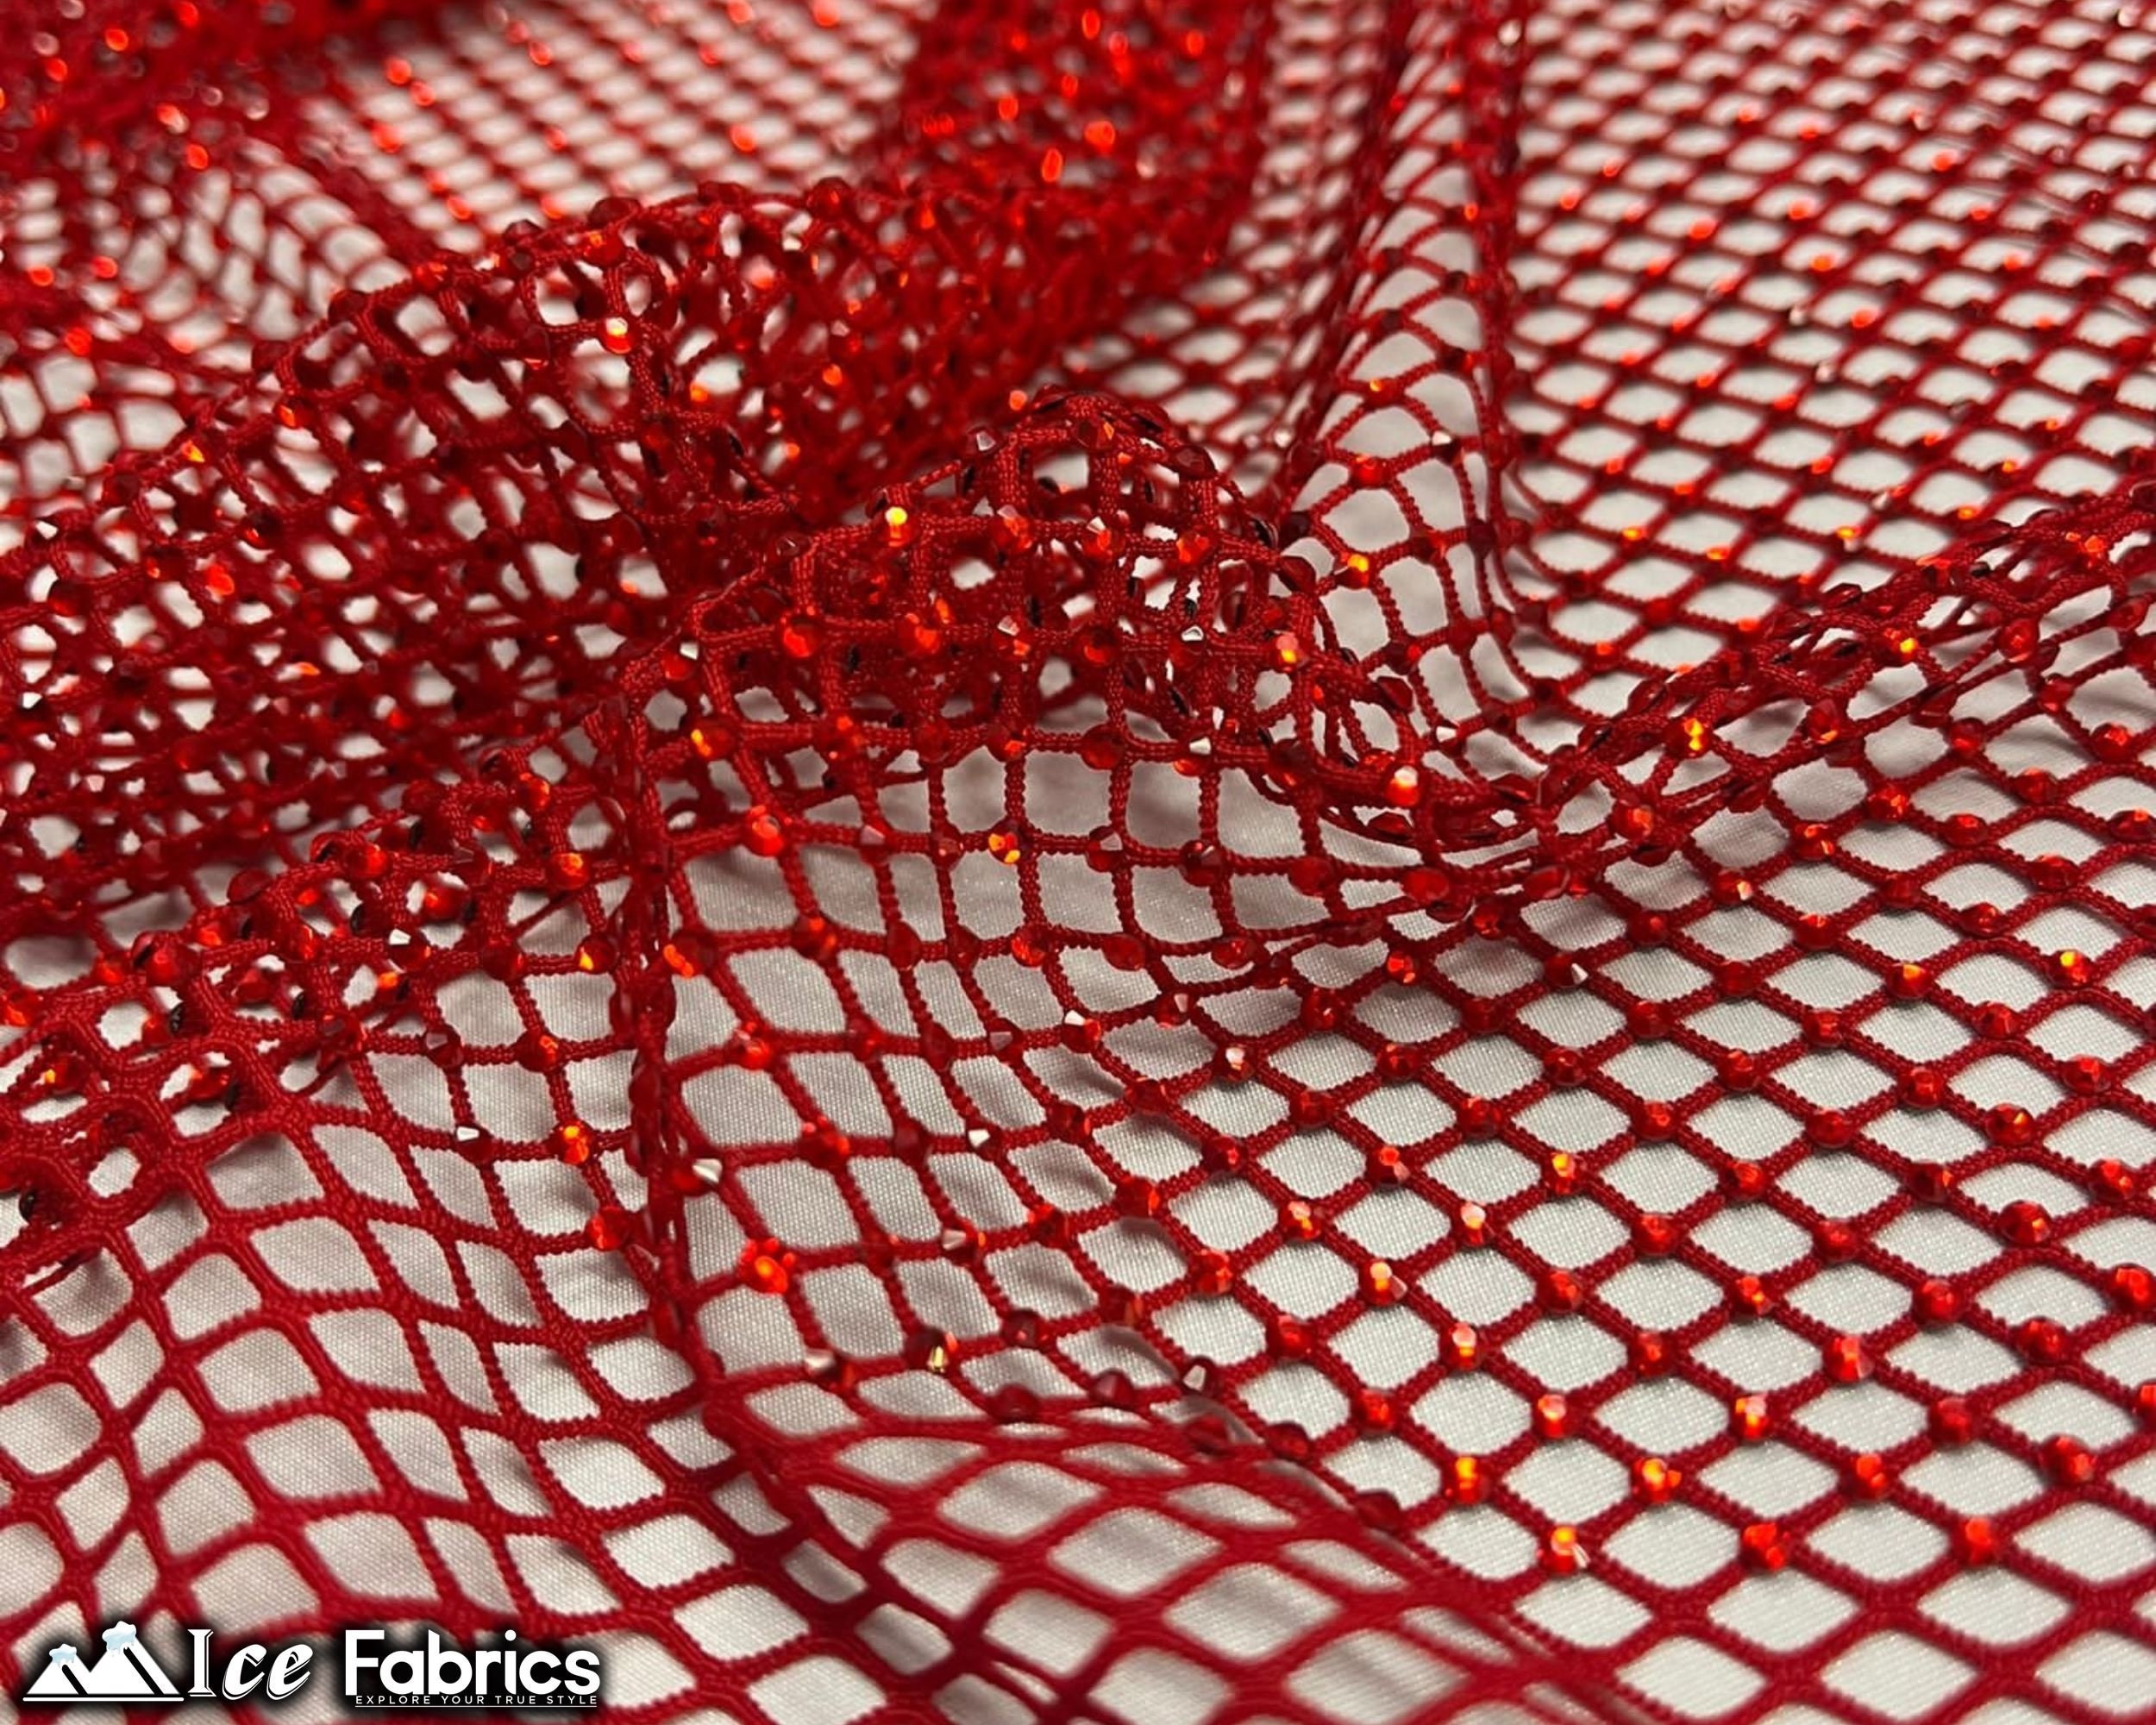 Buy Red Crystal 4 Way Stretch Beaded Fabric on Fish Net Fabric by the Yard  Spandex Lace With Handmade Beads Online in India 